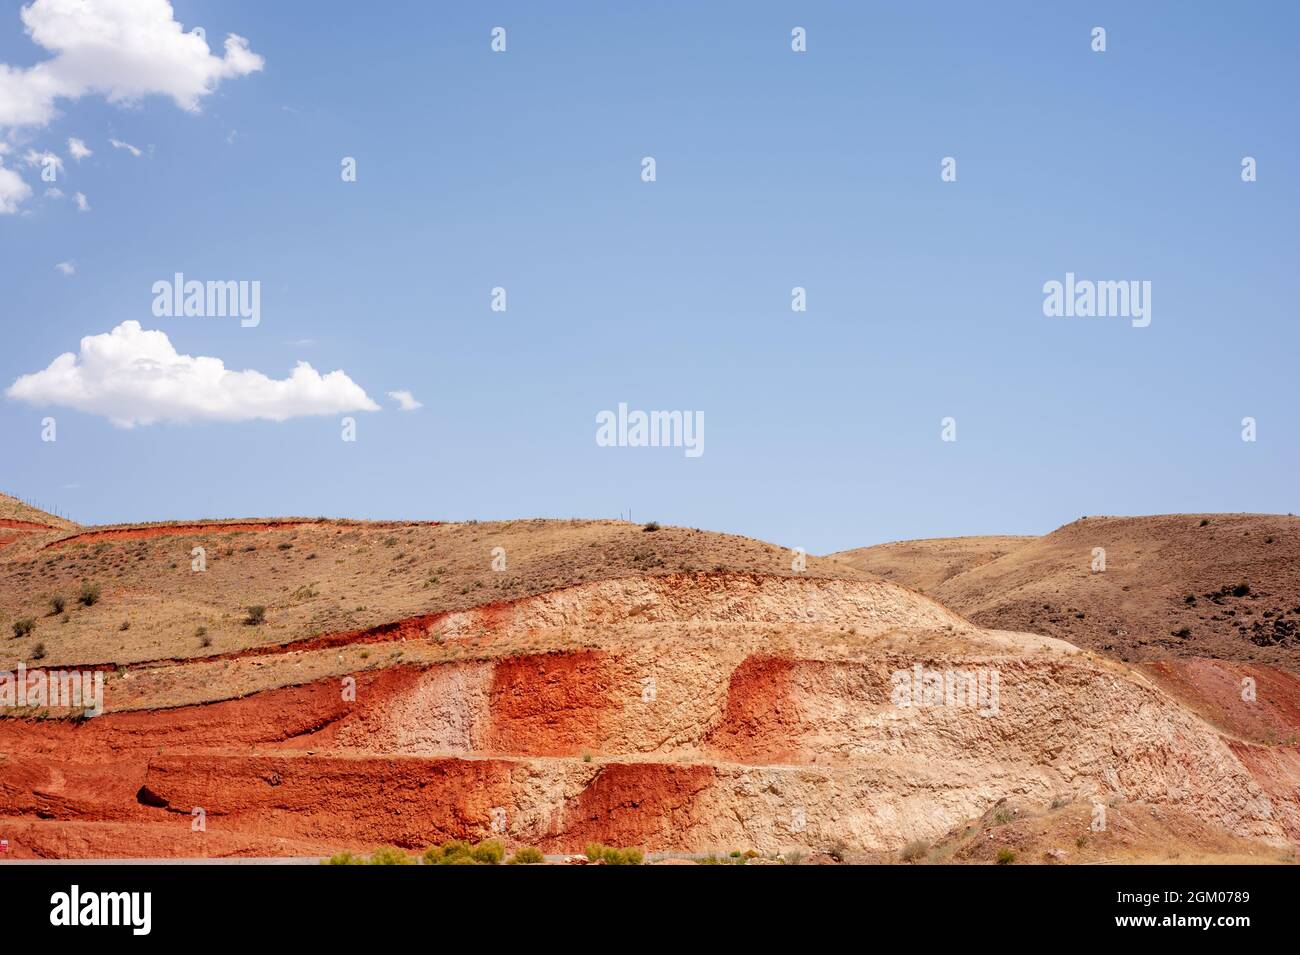 Sideling Hill, syncline, metamorphic layers, Allegheny Mountains, Appalachian Mountains for road construction in iran with blue cloudy sky Stock Photo